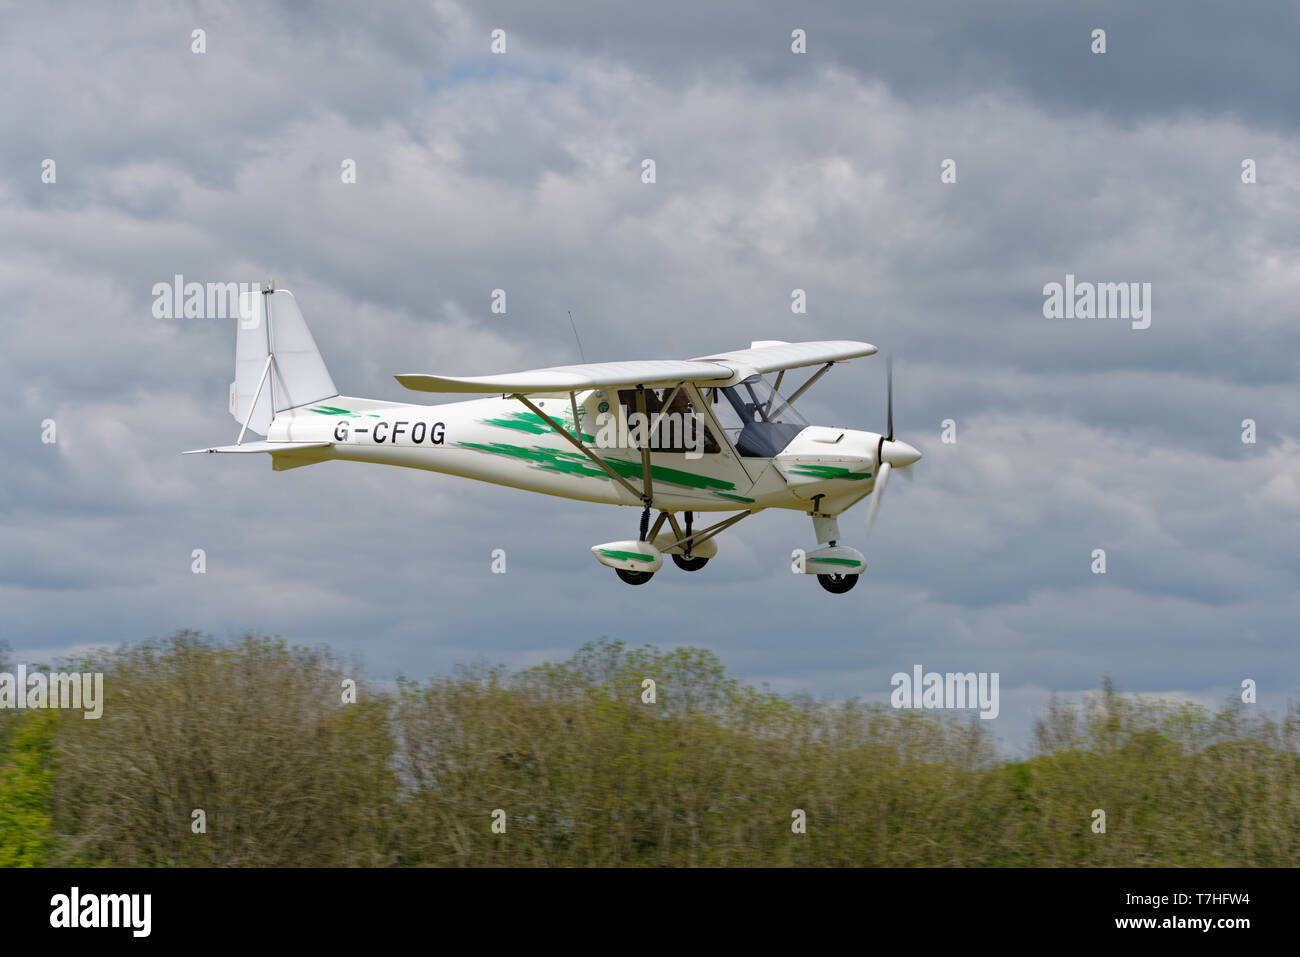 Ikarus C42 kit plane G-Cfog coming into land at Popham Airfield in Hampshire during the spring microlight fly-in event Stock Photo